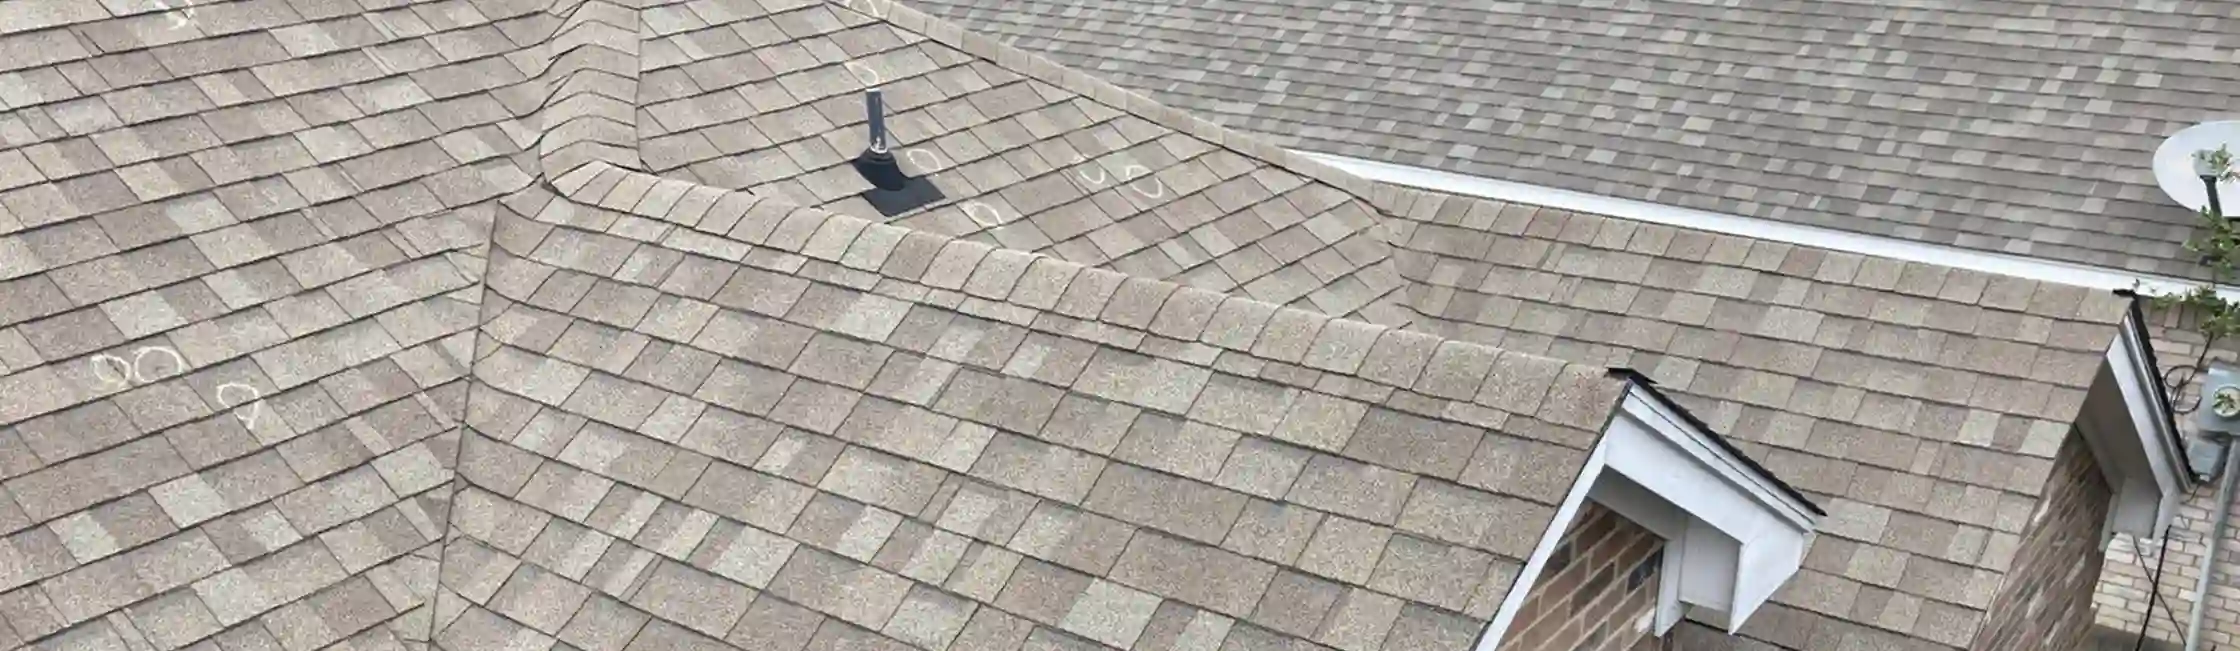 Residential roofing and replacement with BLC Construction in Prosper Texas, 75078